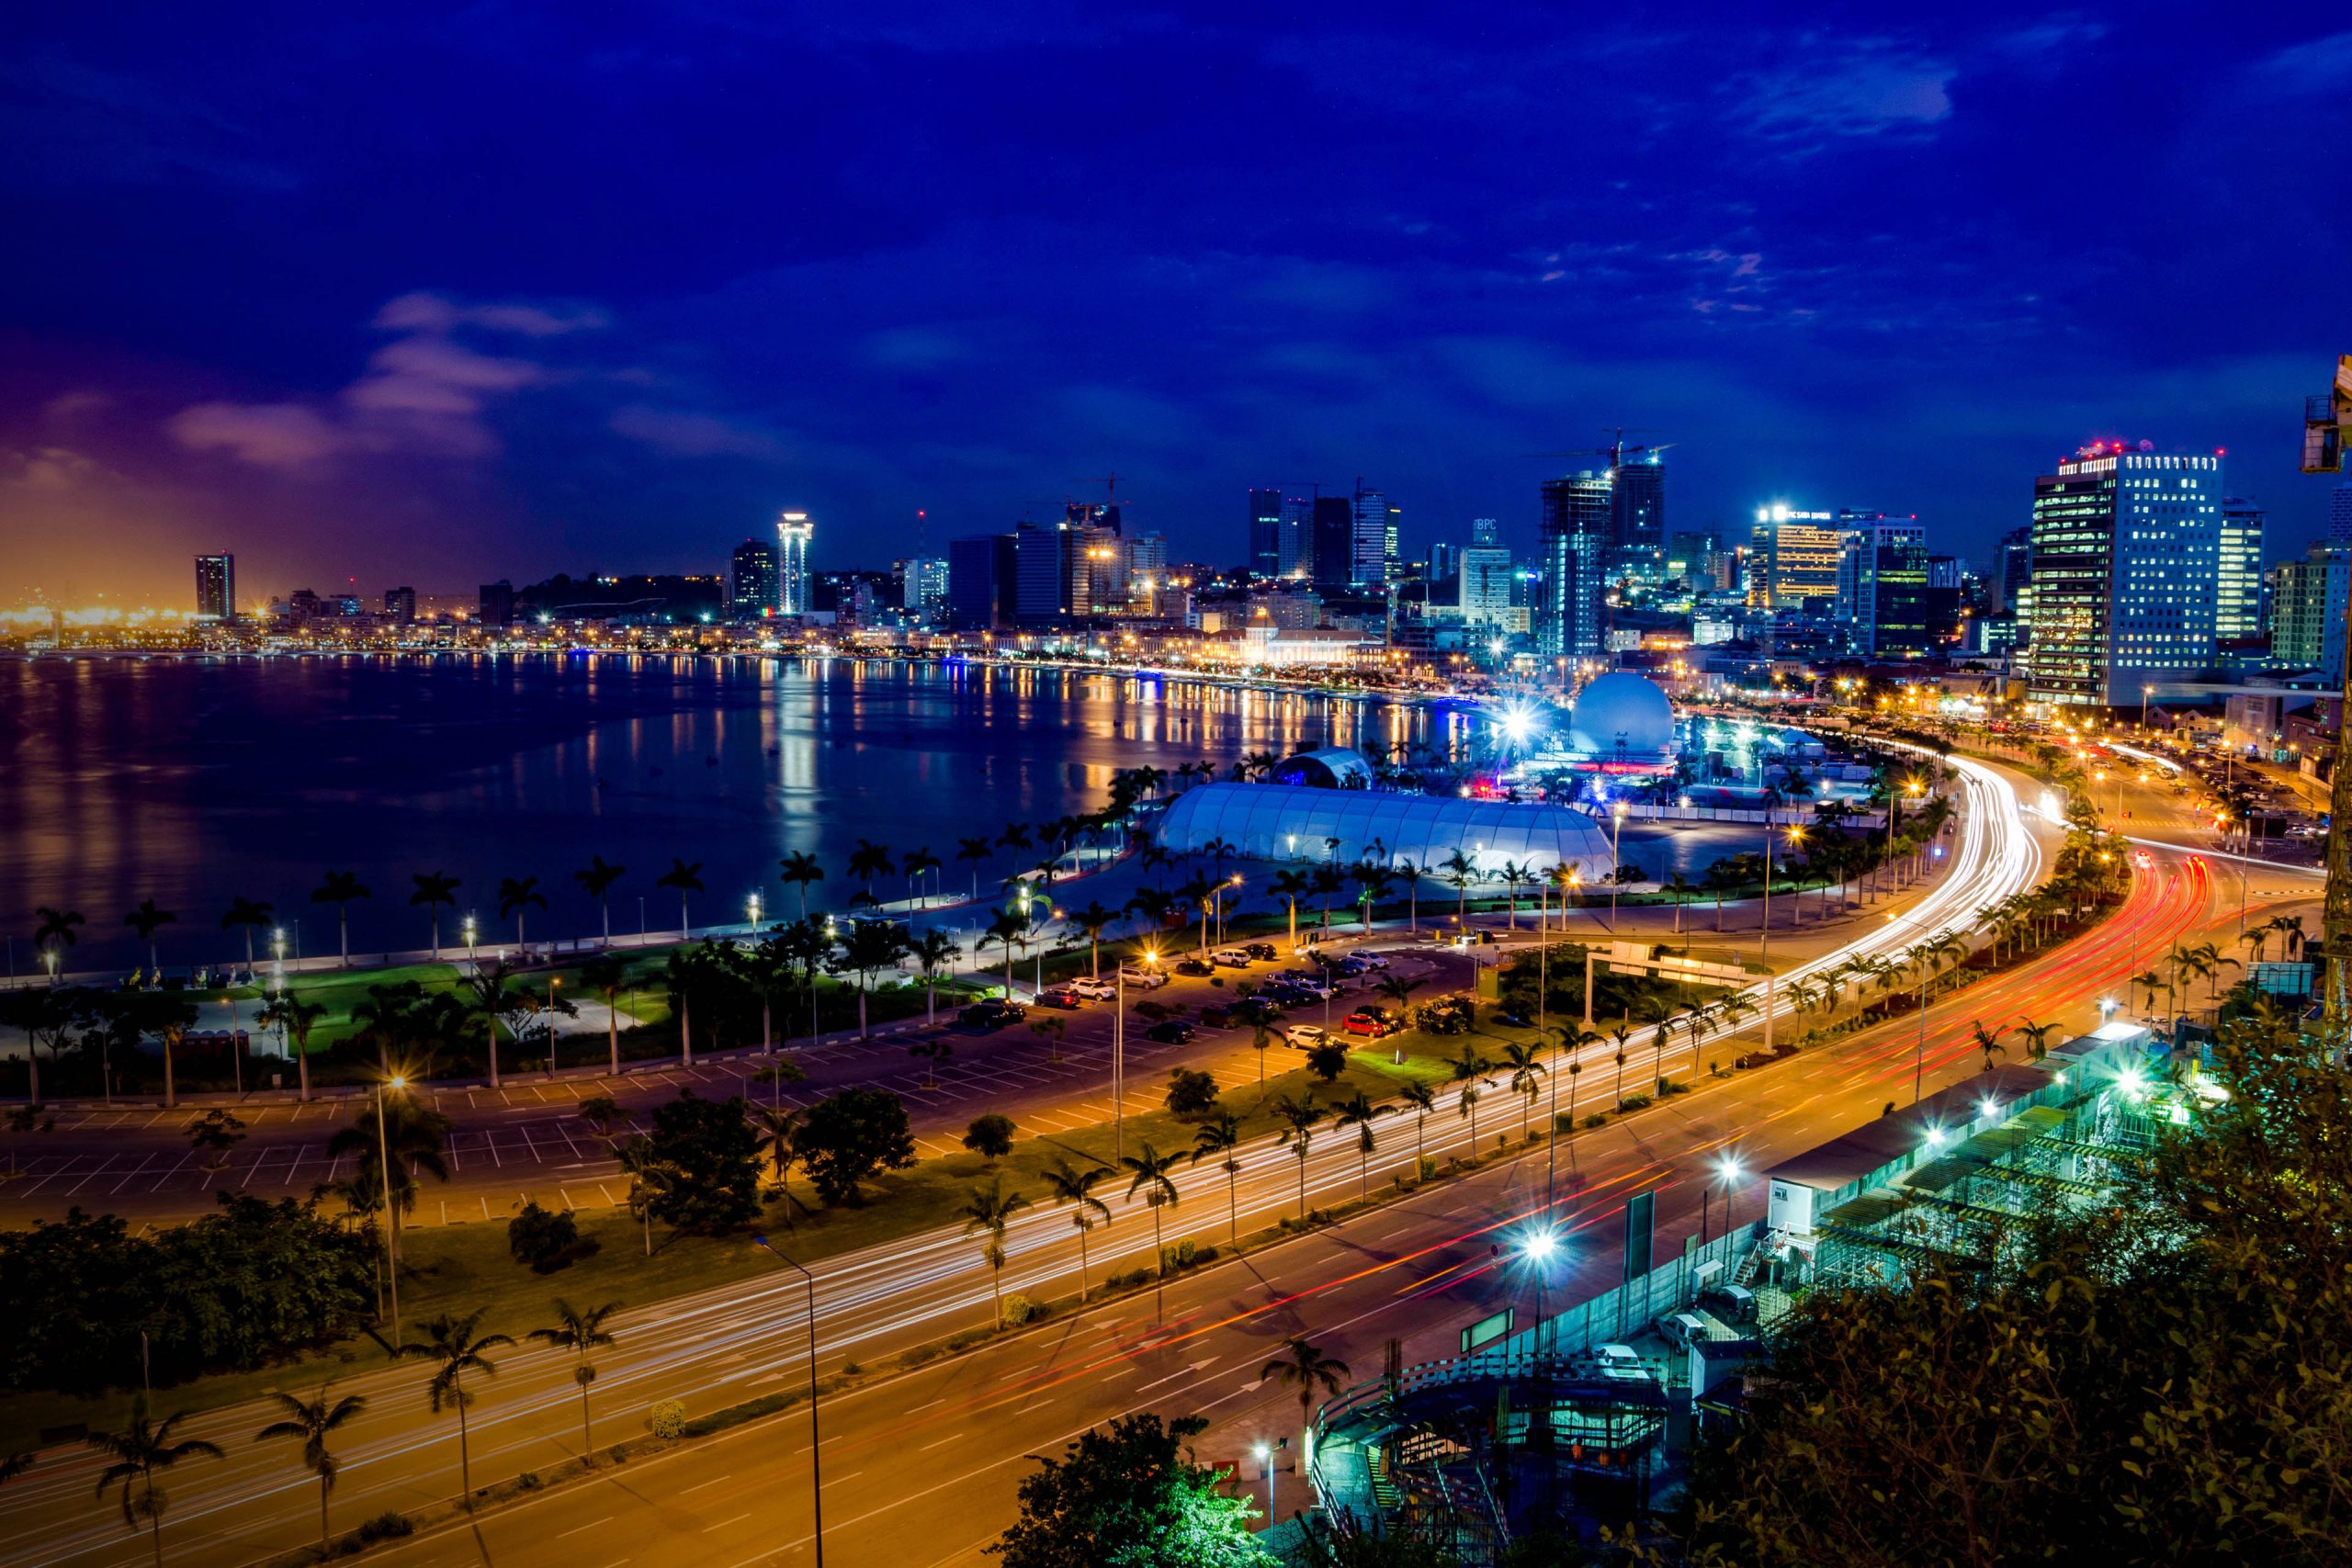 Skyline of Luanda and its seaside during the blue hour. Many lights and high rise buildings.